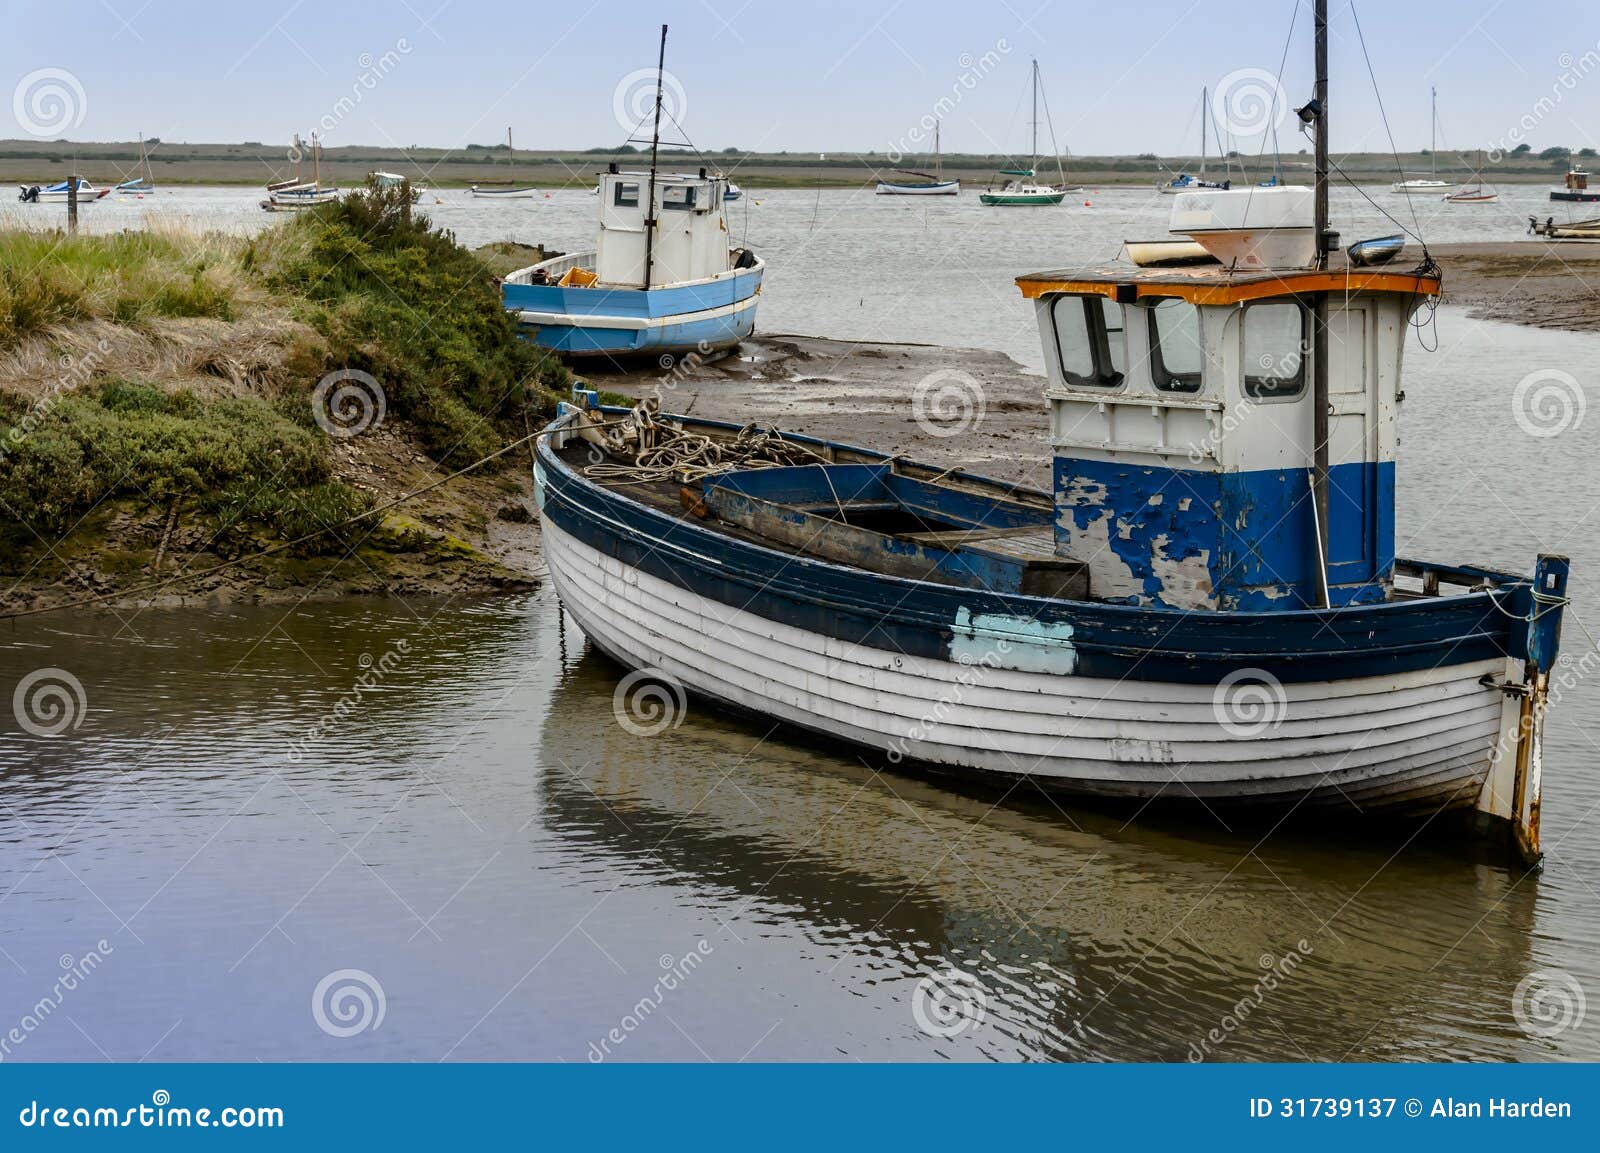 Old wooden fishing boat stock image. Image of flats, water ...